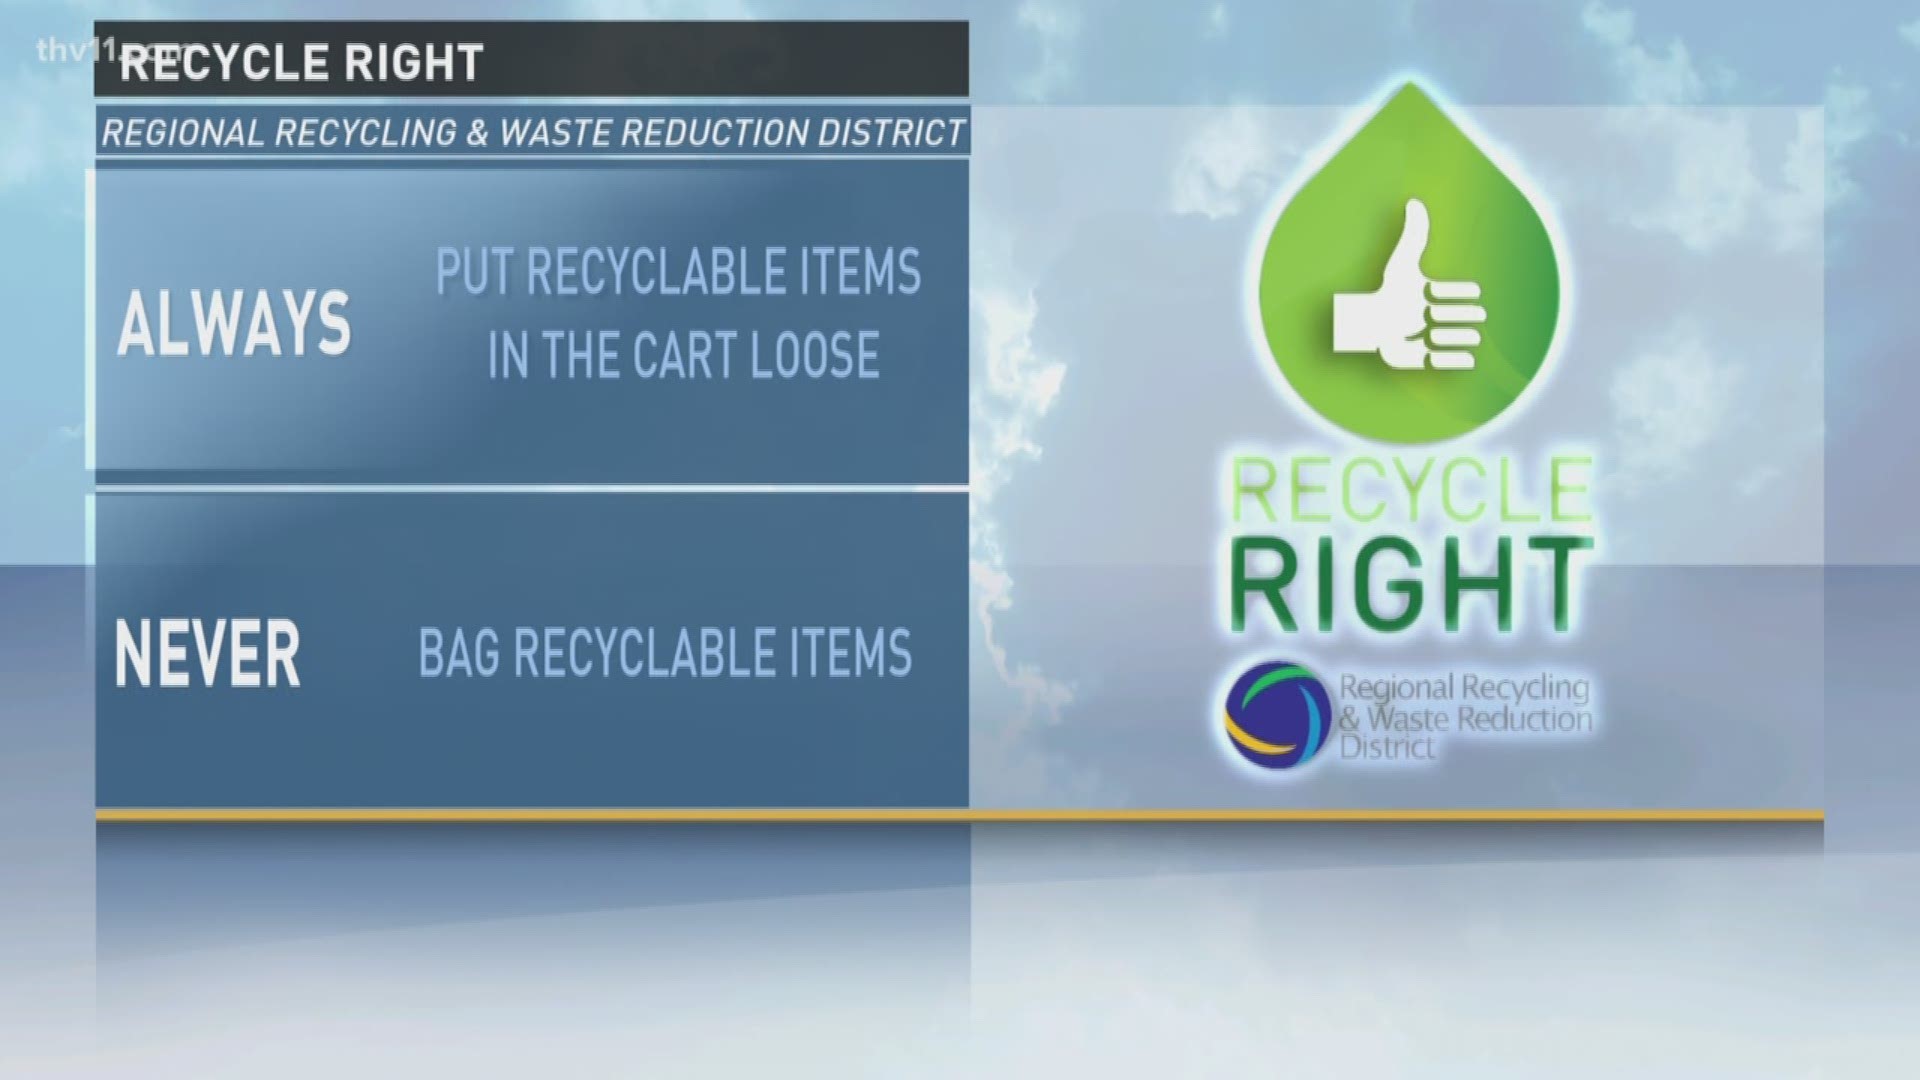 Meteorologist Mariel Ruiz gives tip #1 for the 'Recycle Right' campaign.